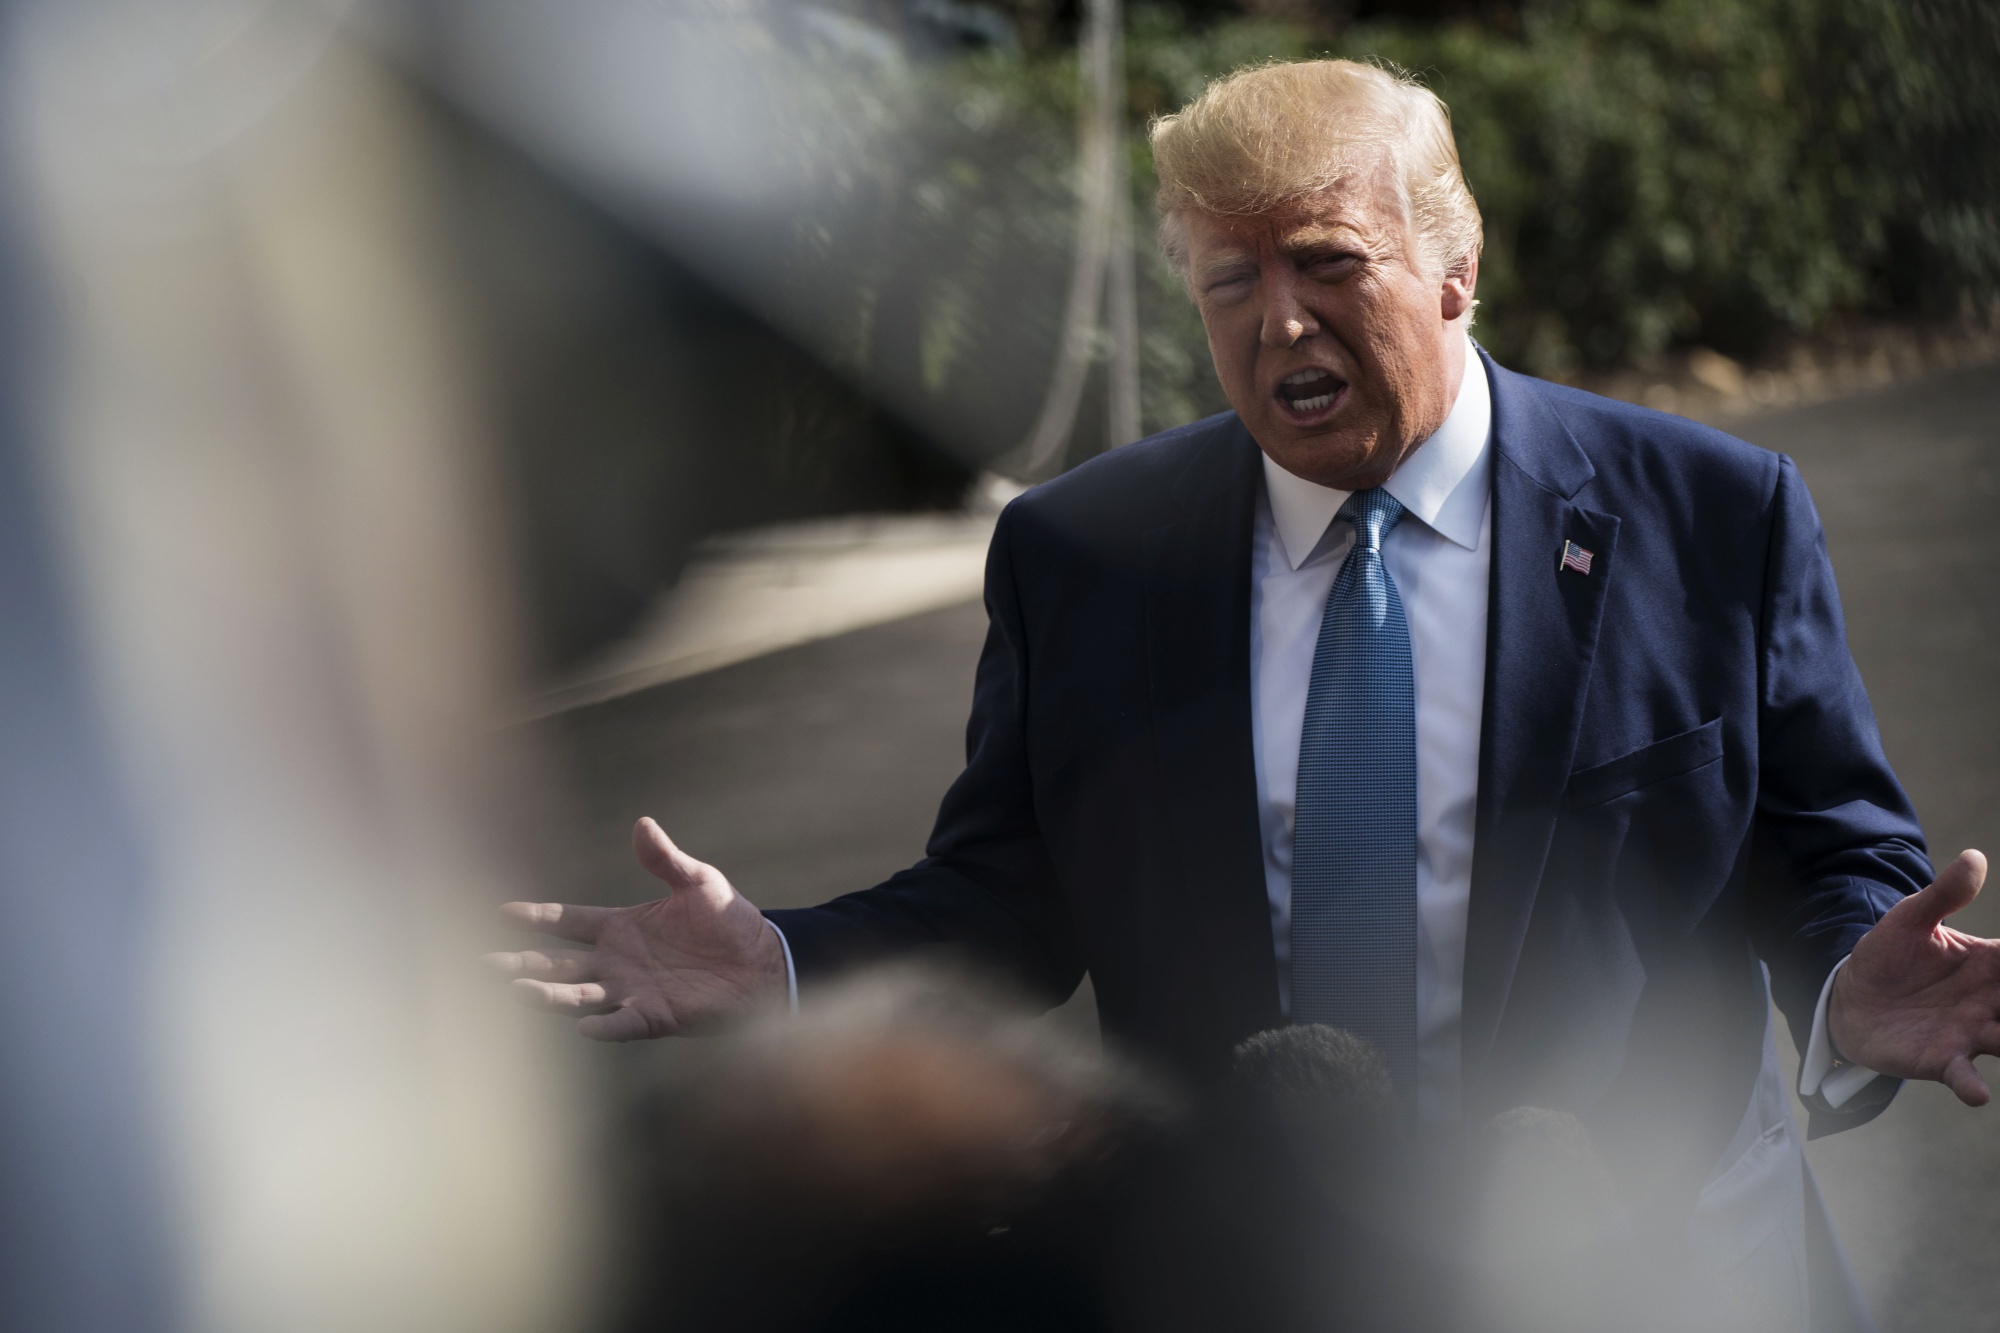 President Donald Trump speaks to members of the media outside of the White House in Washington on Oct. 4, 2019.&nbsp;